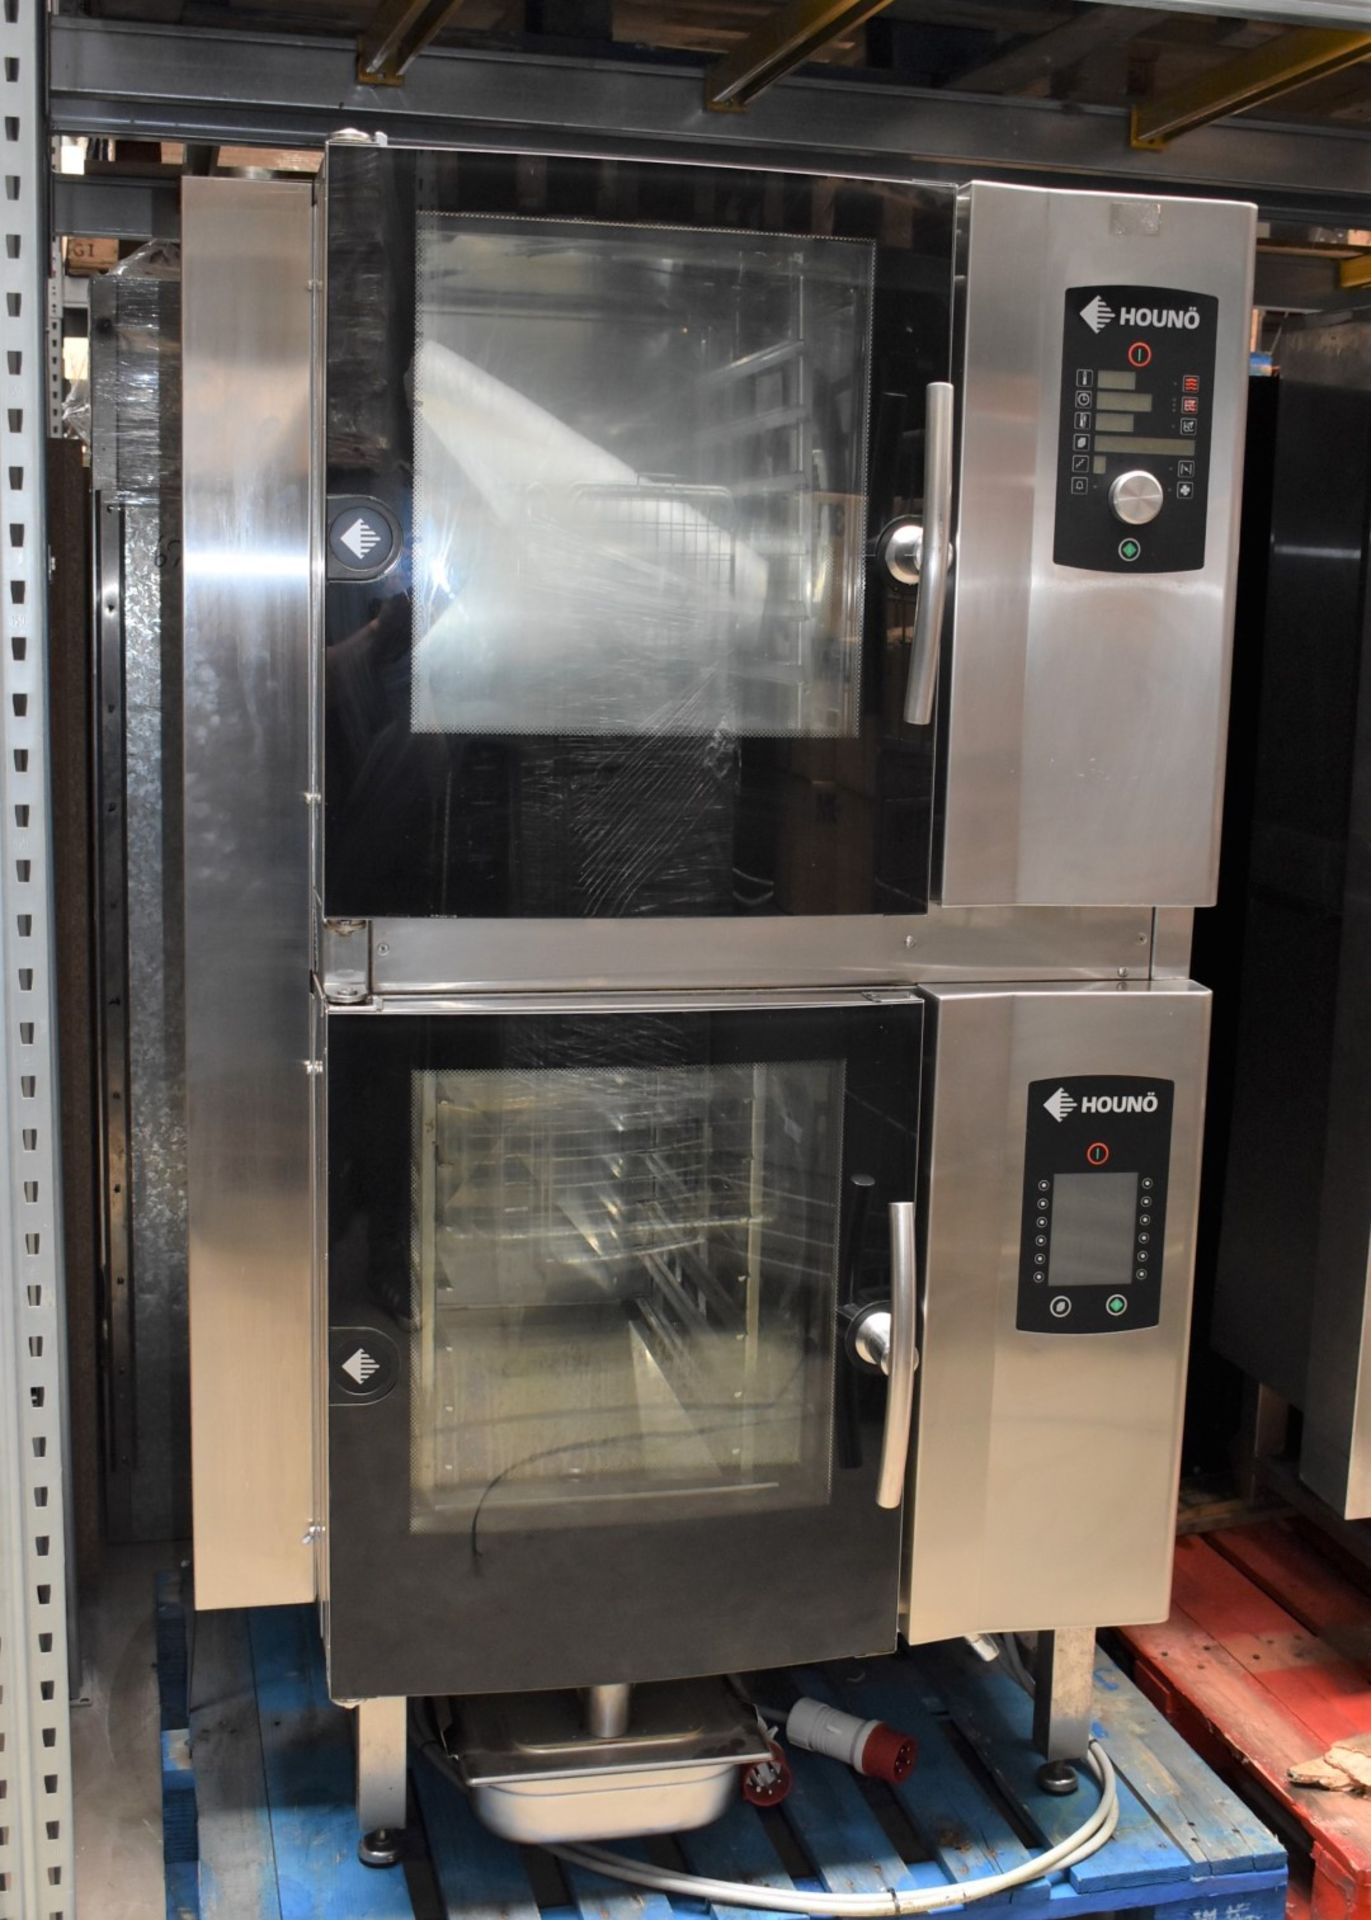 1 x Houno Double 6 Grid Stacked Combi Oven - Model: C 1.06 / CPE 1.06 - 3 Phase - Image 19 of 21